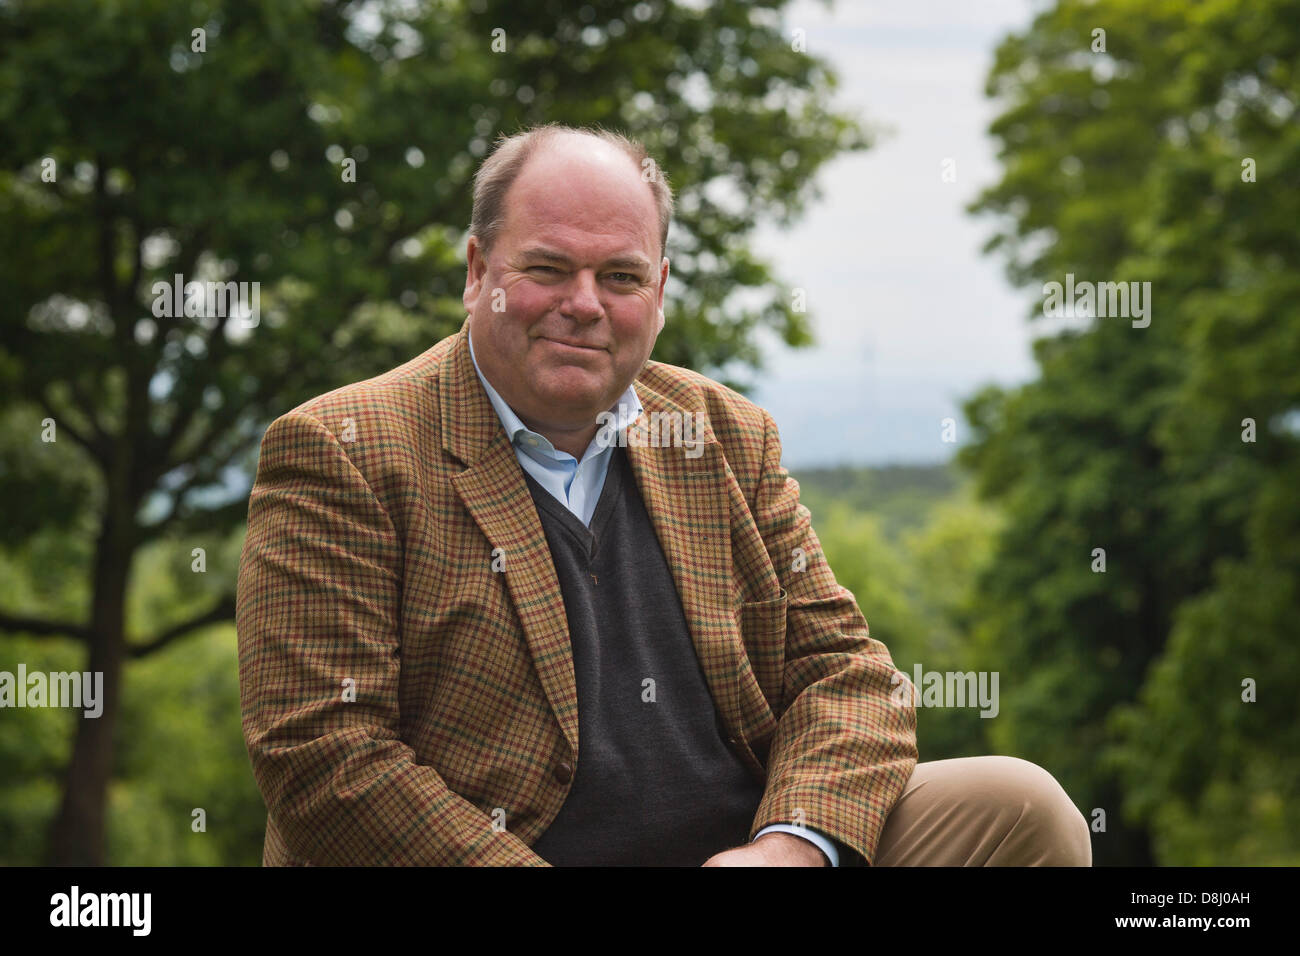 Walter Kohl, son of former German Chancellor Helmut Kohl, poses for the photographer in Koenigstein, Germany, 27 May 2013. Photo: FRANK RUMPENHORST Stock Photo